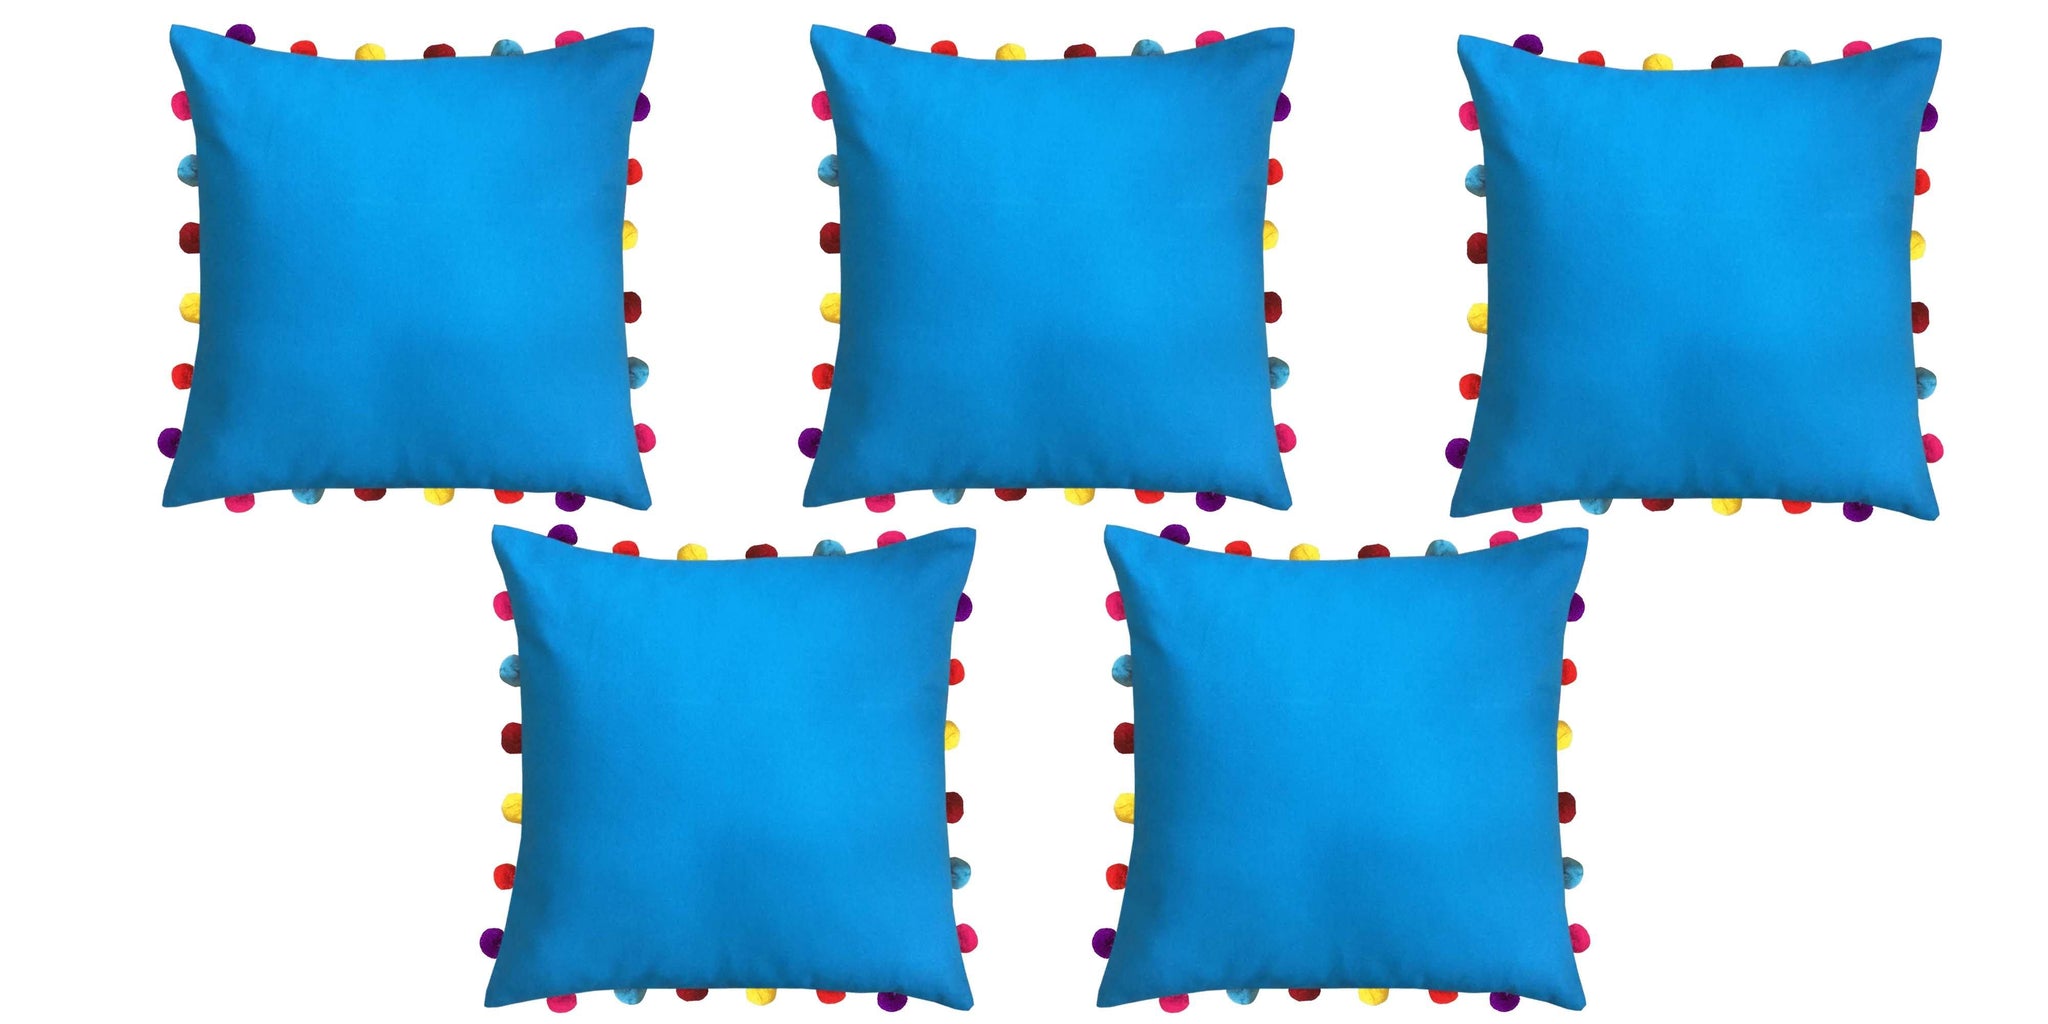 Lushomes Blue Sofa Cushion Cover Online with Colorful Pom Pom (Pack of 5 pcs, 18 x 18 inches) - Lushomes